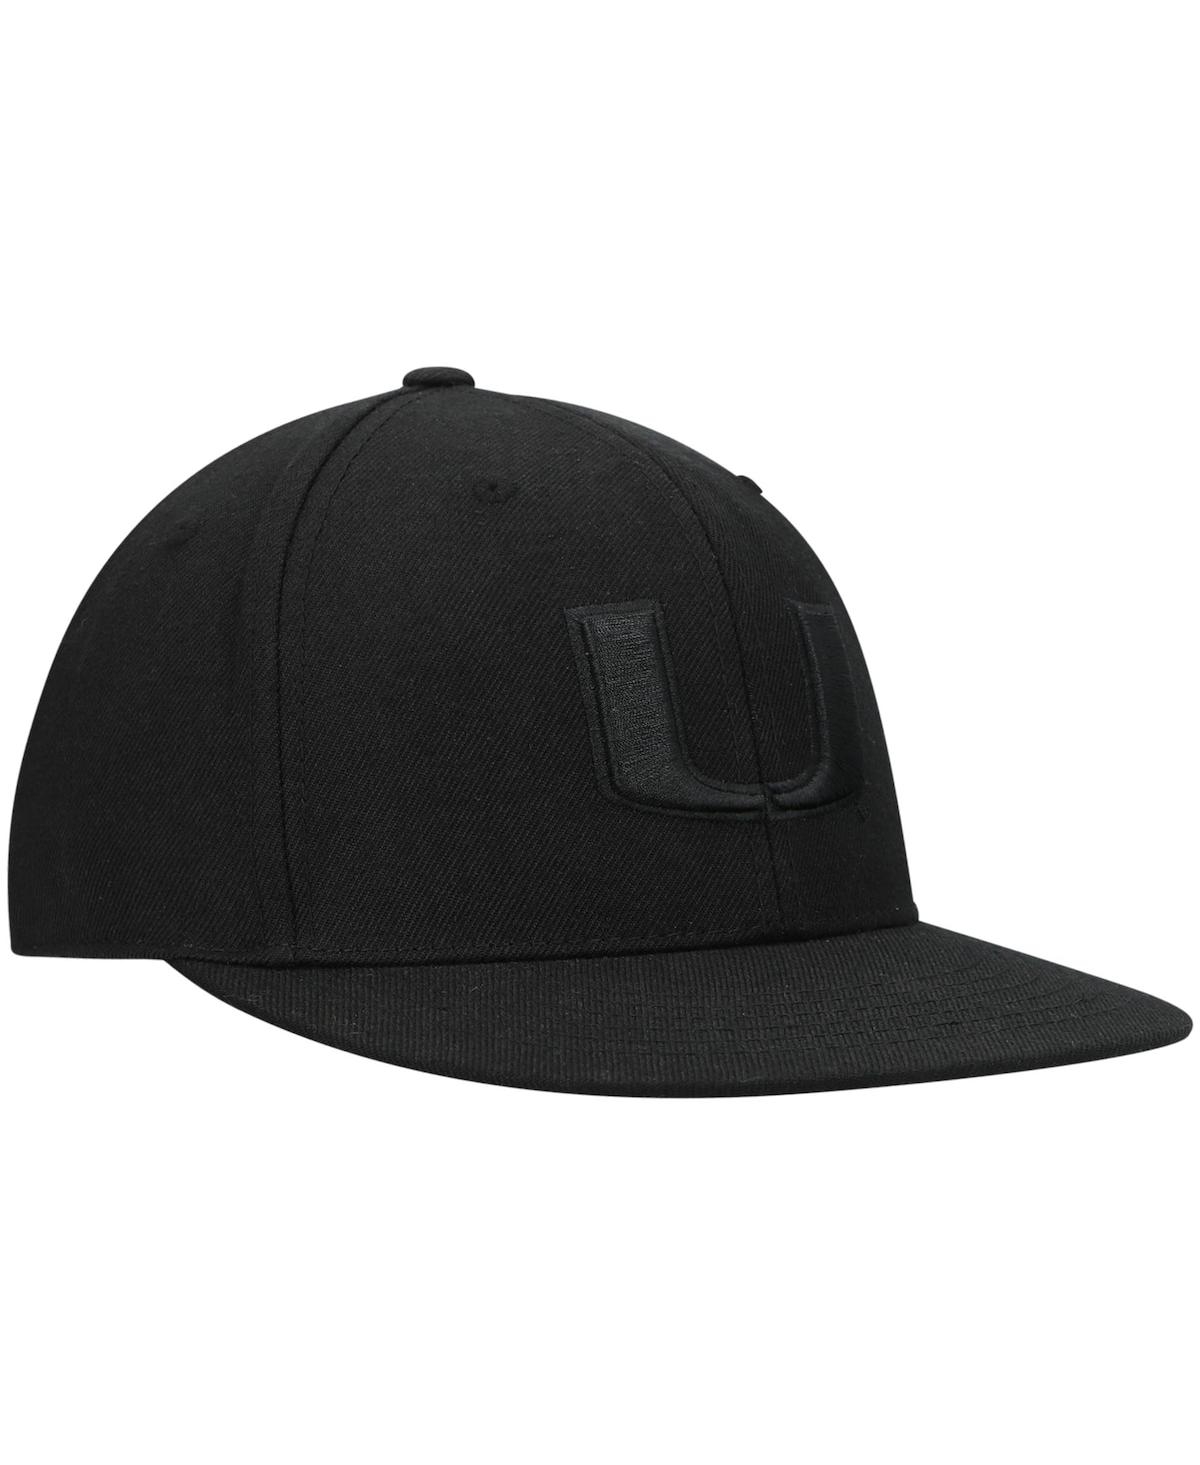 Shop Top Of The World Men's  Miami Hurricanes Black On Black Fitted Hat